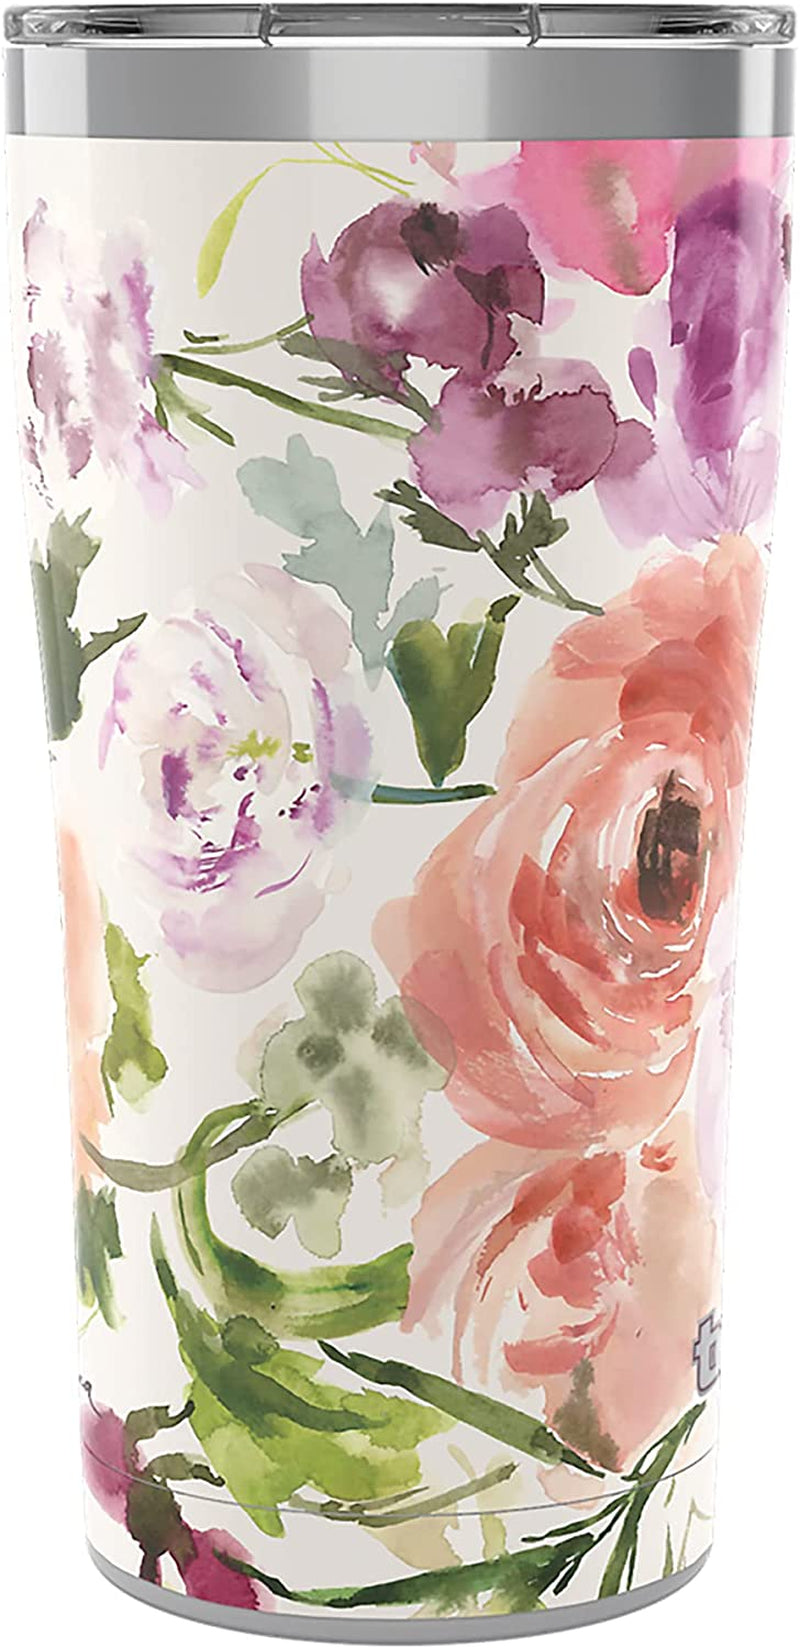 Tervis Made in USA Double Walled Kelly Ventura Floral Collection Insulated Tumbler Cup Keeps Drinks Cold & Hot, 16Oz 4Pk - Classic, Assorted Home & Garden > Kitchen & Dining > Tableware > Drinkware Tervis Heather Rose 20oz - Stainless Steel 